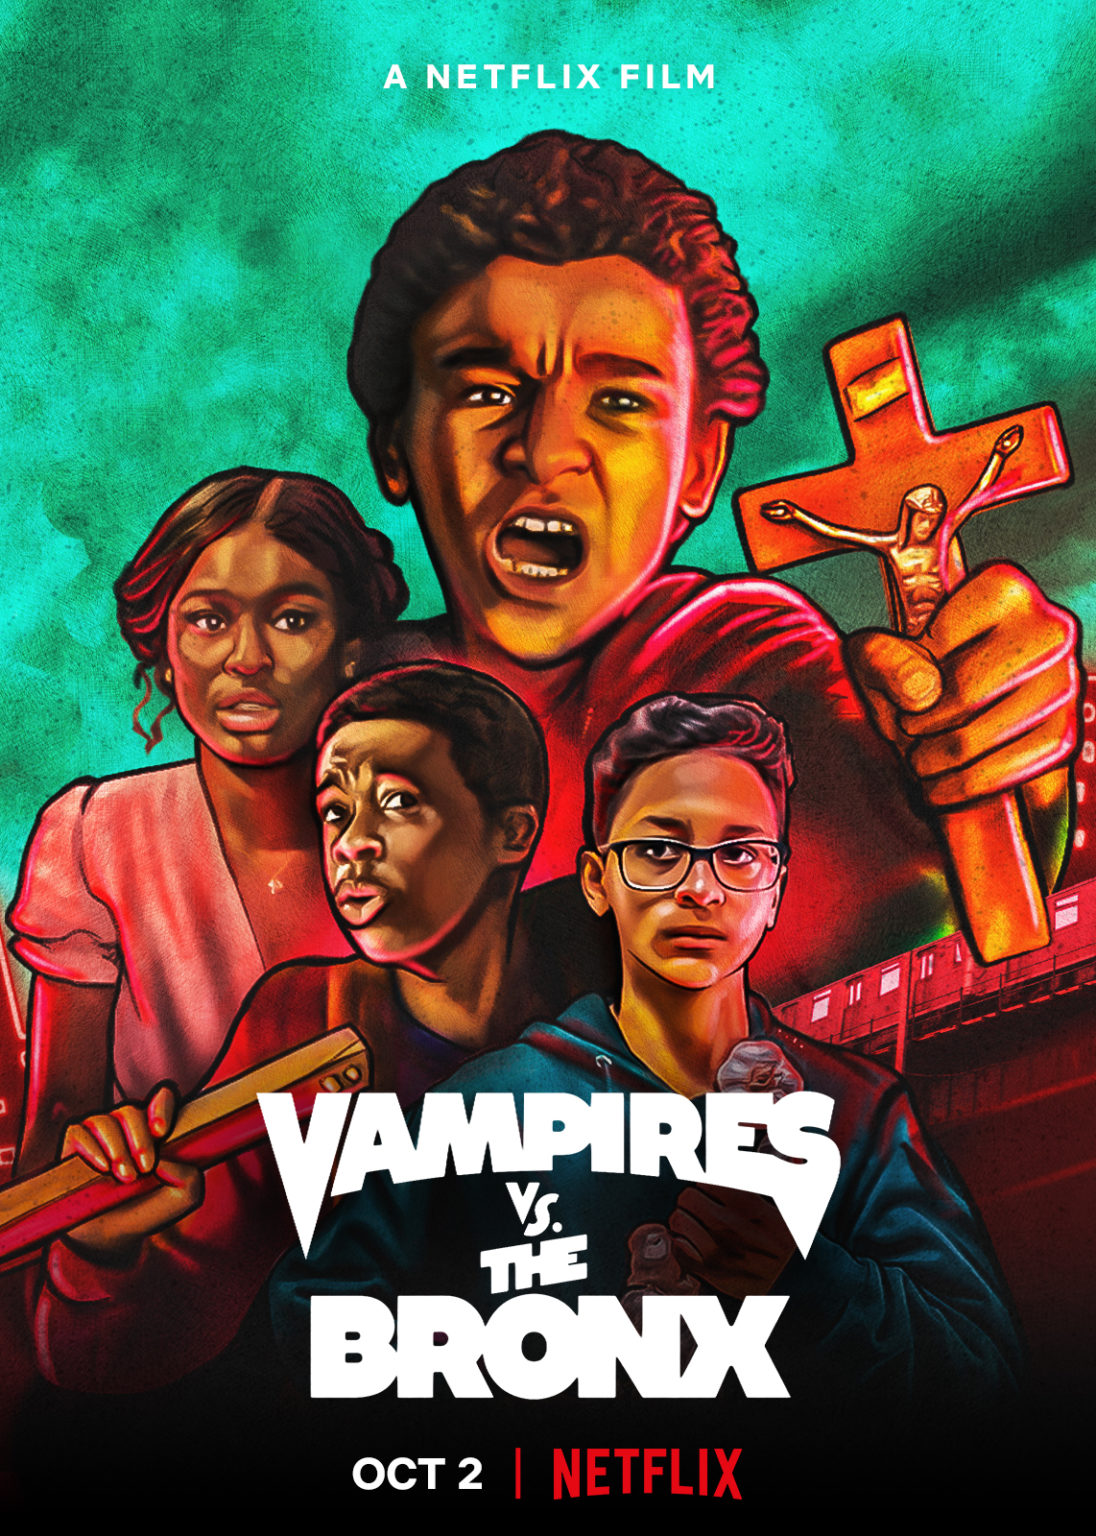 Check out the trailer for VAMPIRES VS THE BRONX. My money is on The